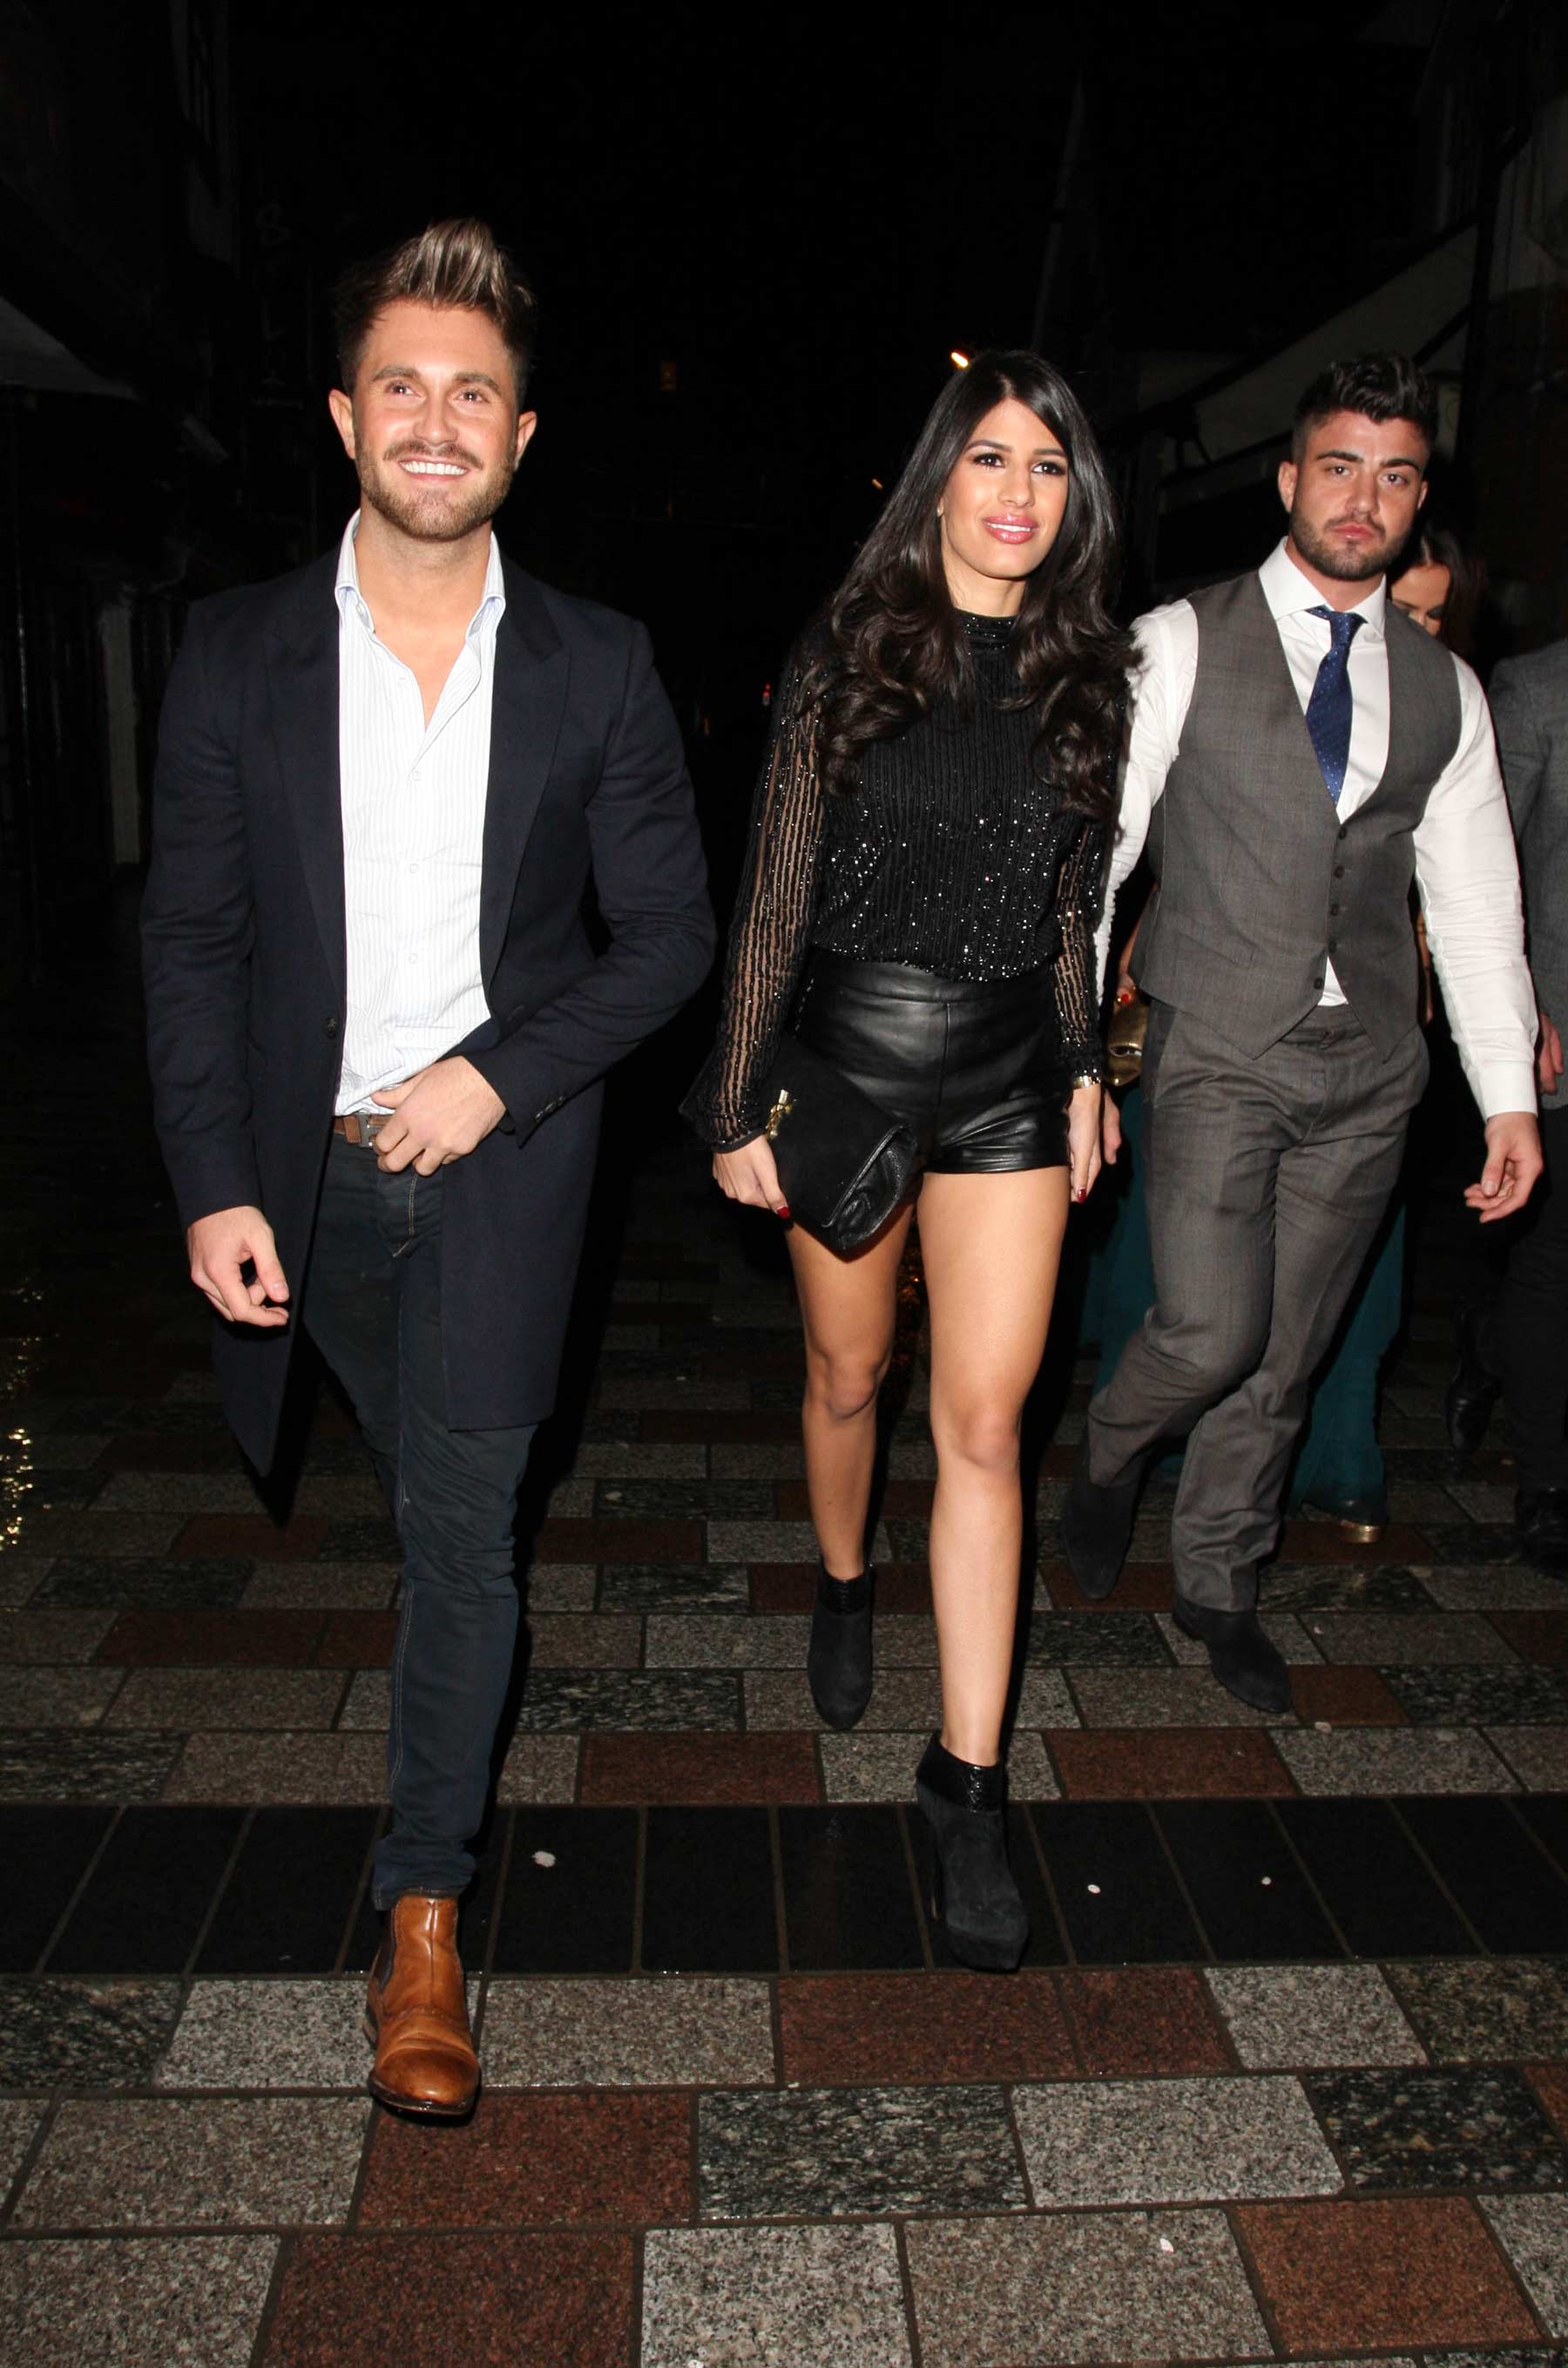 Jasmin Walia out in Maidstone Kent